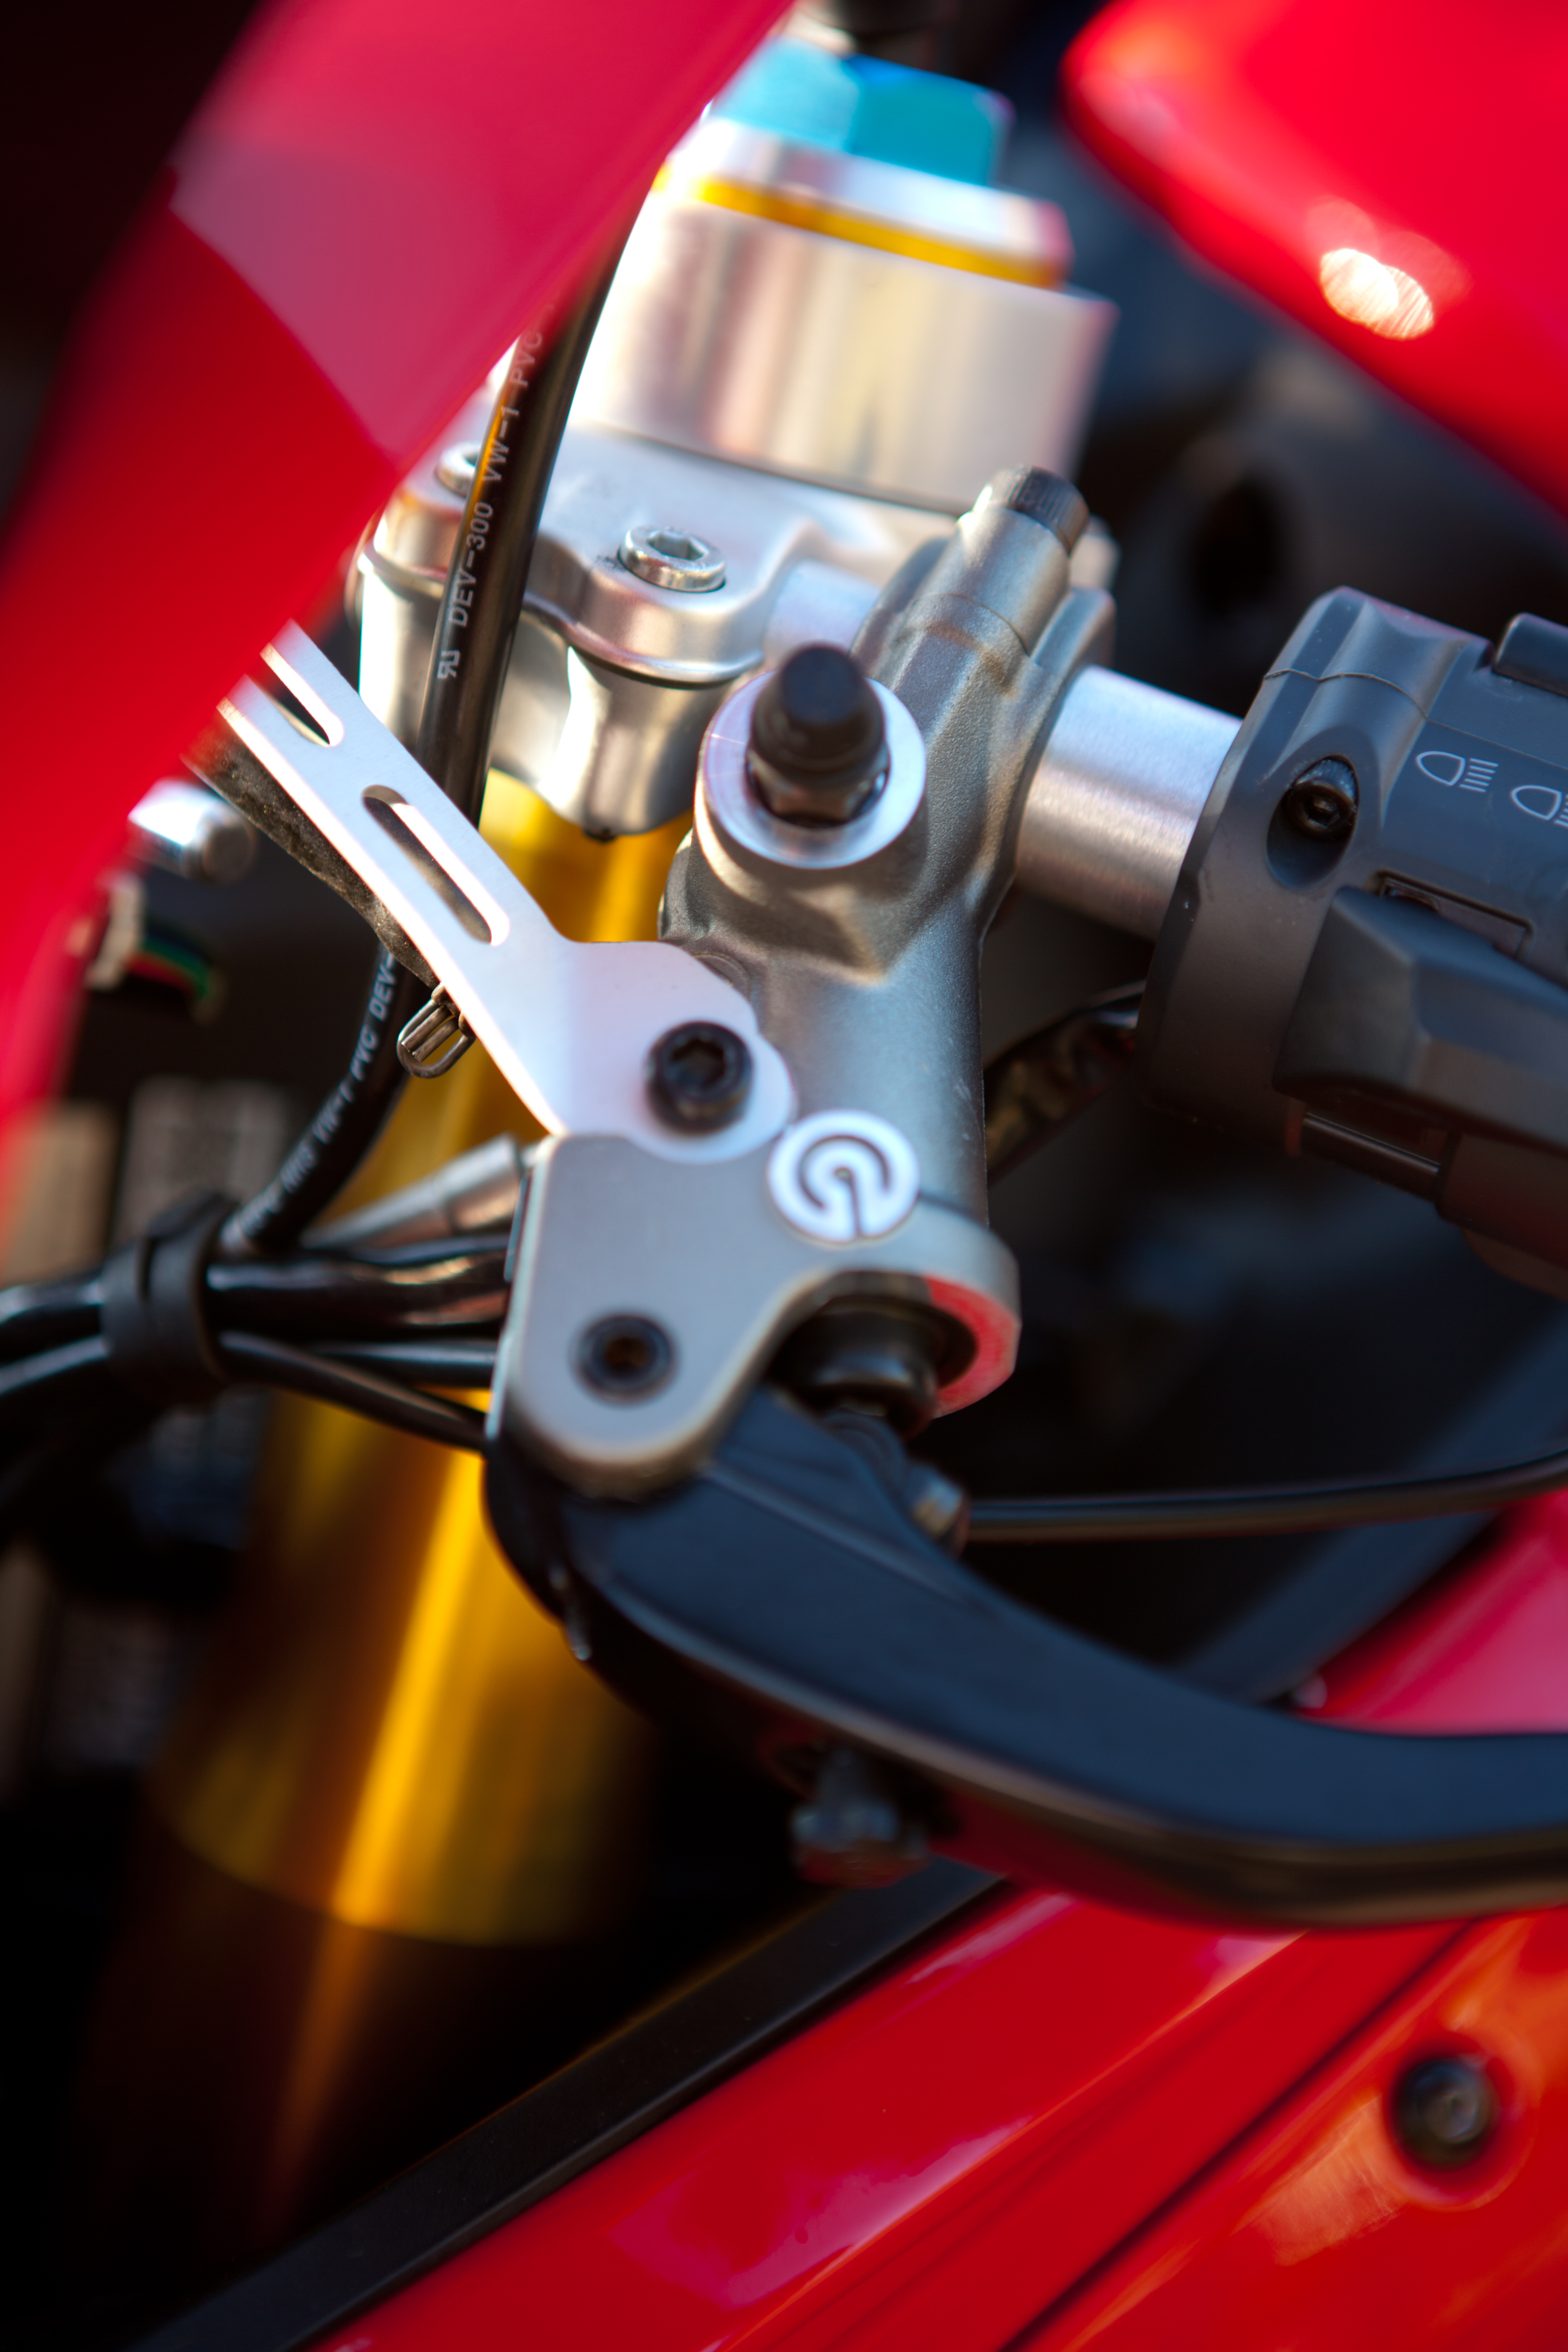 UK road test: Ducati 1299 Panigale S review